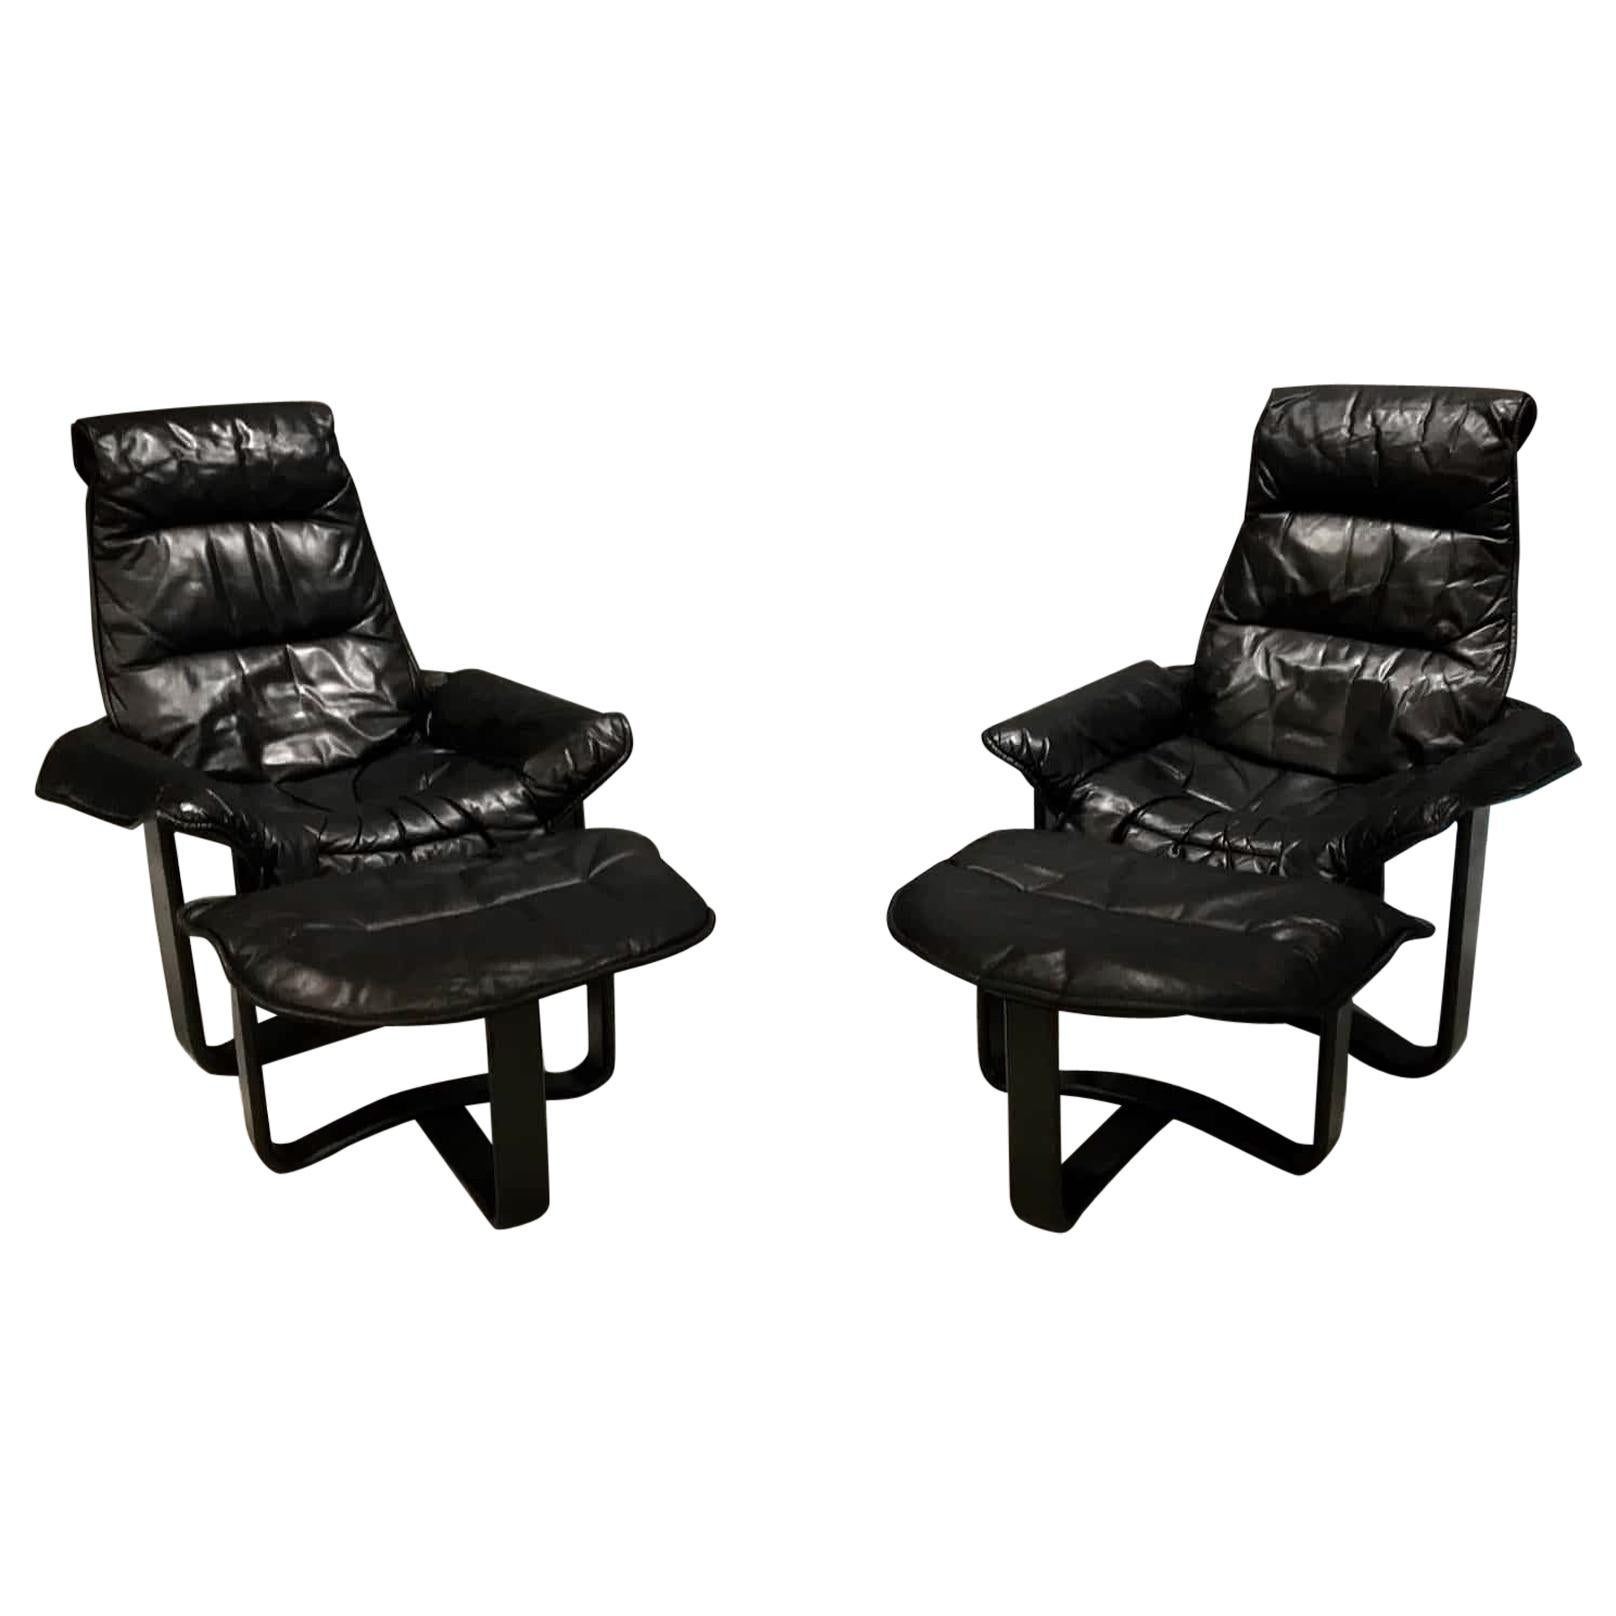 Ingmar Relling Black Leather, Midcentury Danish Lounge Chairs and Ottoman